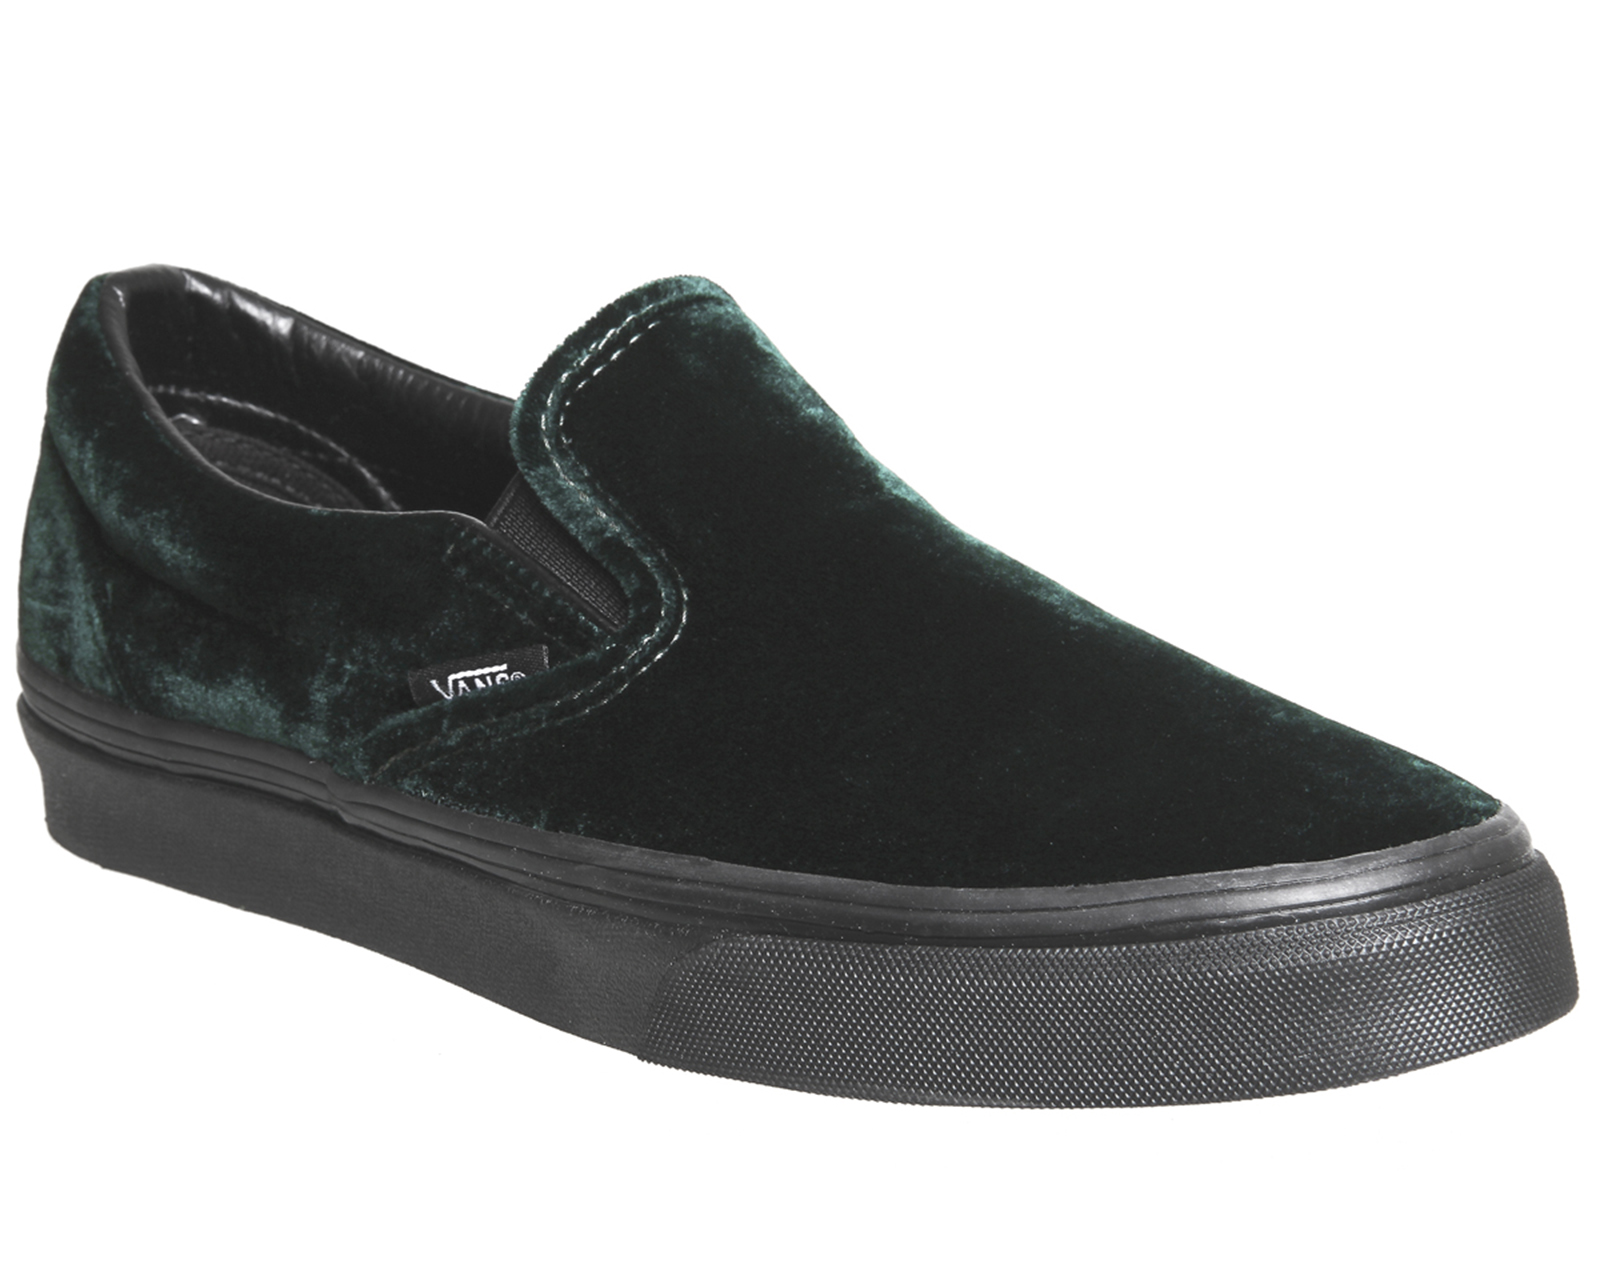 green slip on trainers